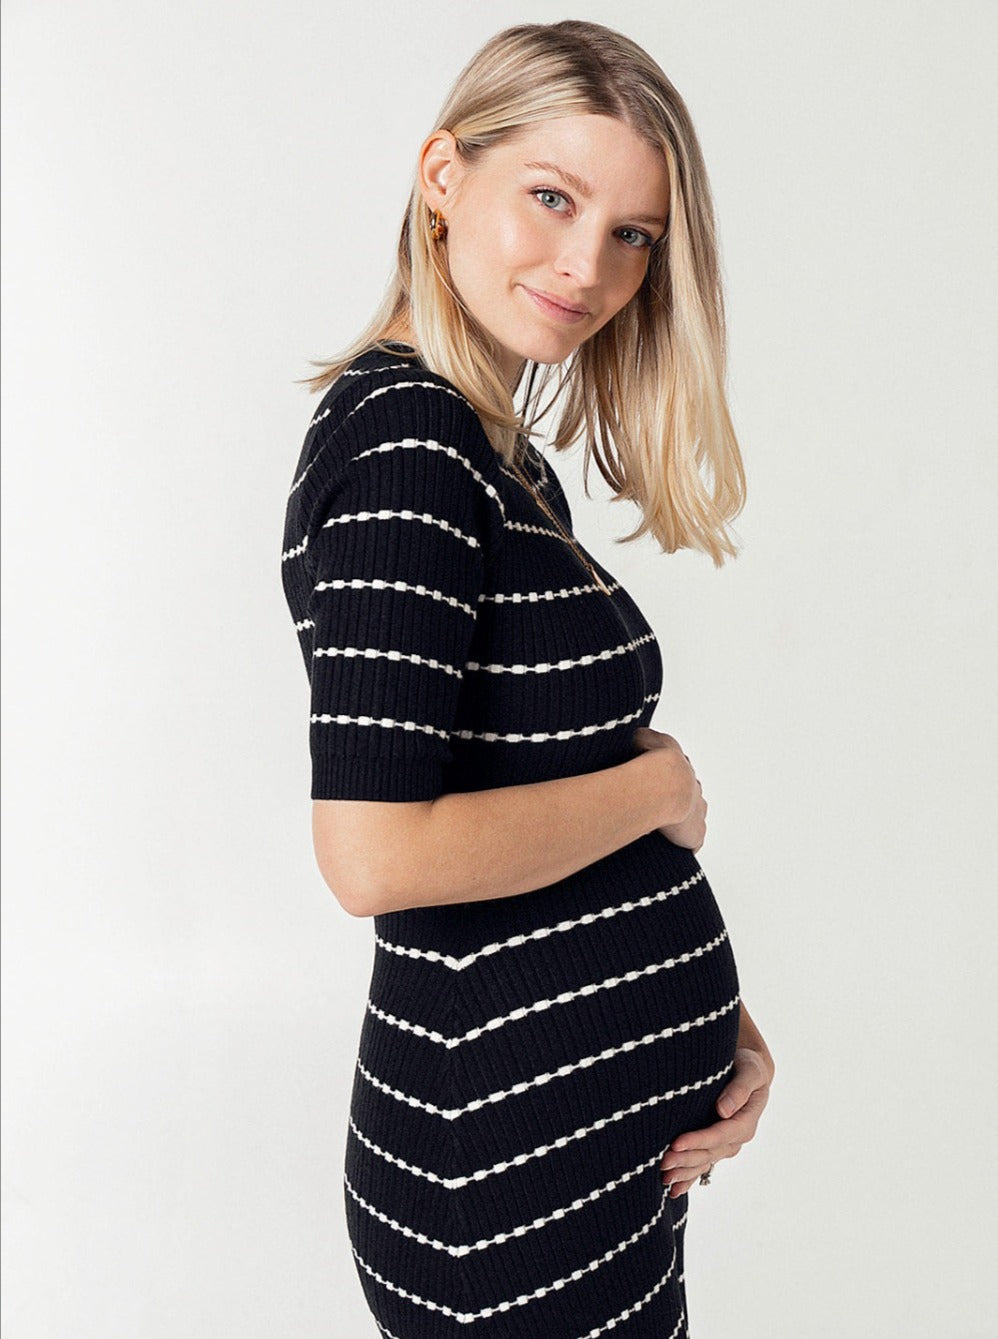 Seraphine - Marianne Maternity/Nursing Top – tiny humans & co.